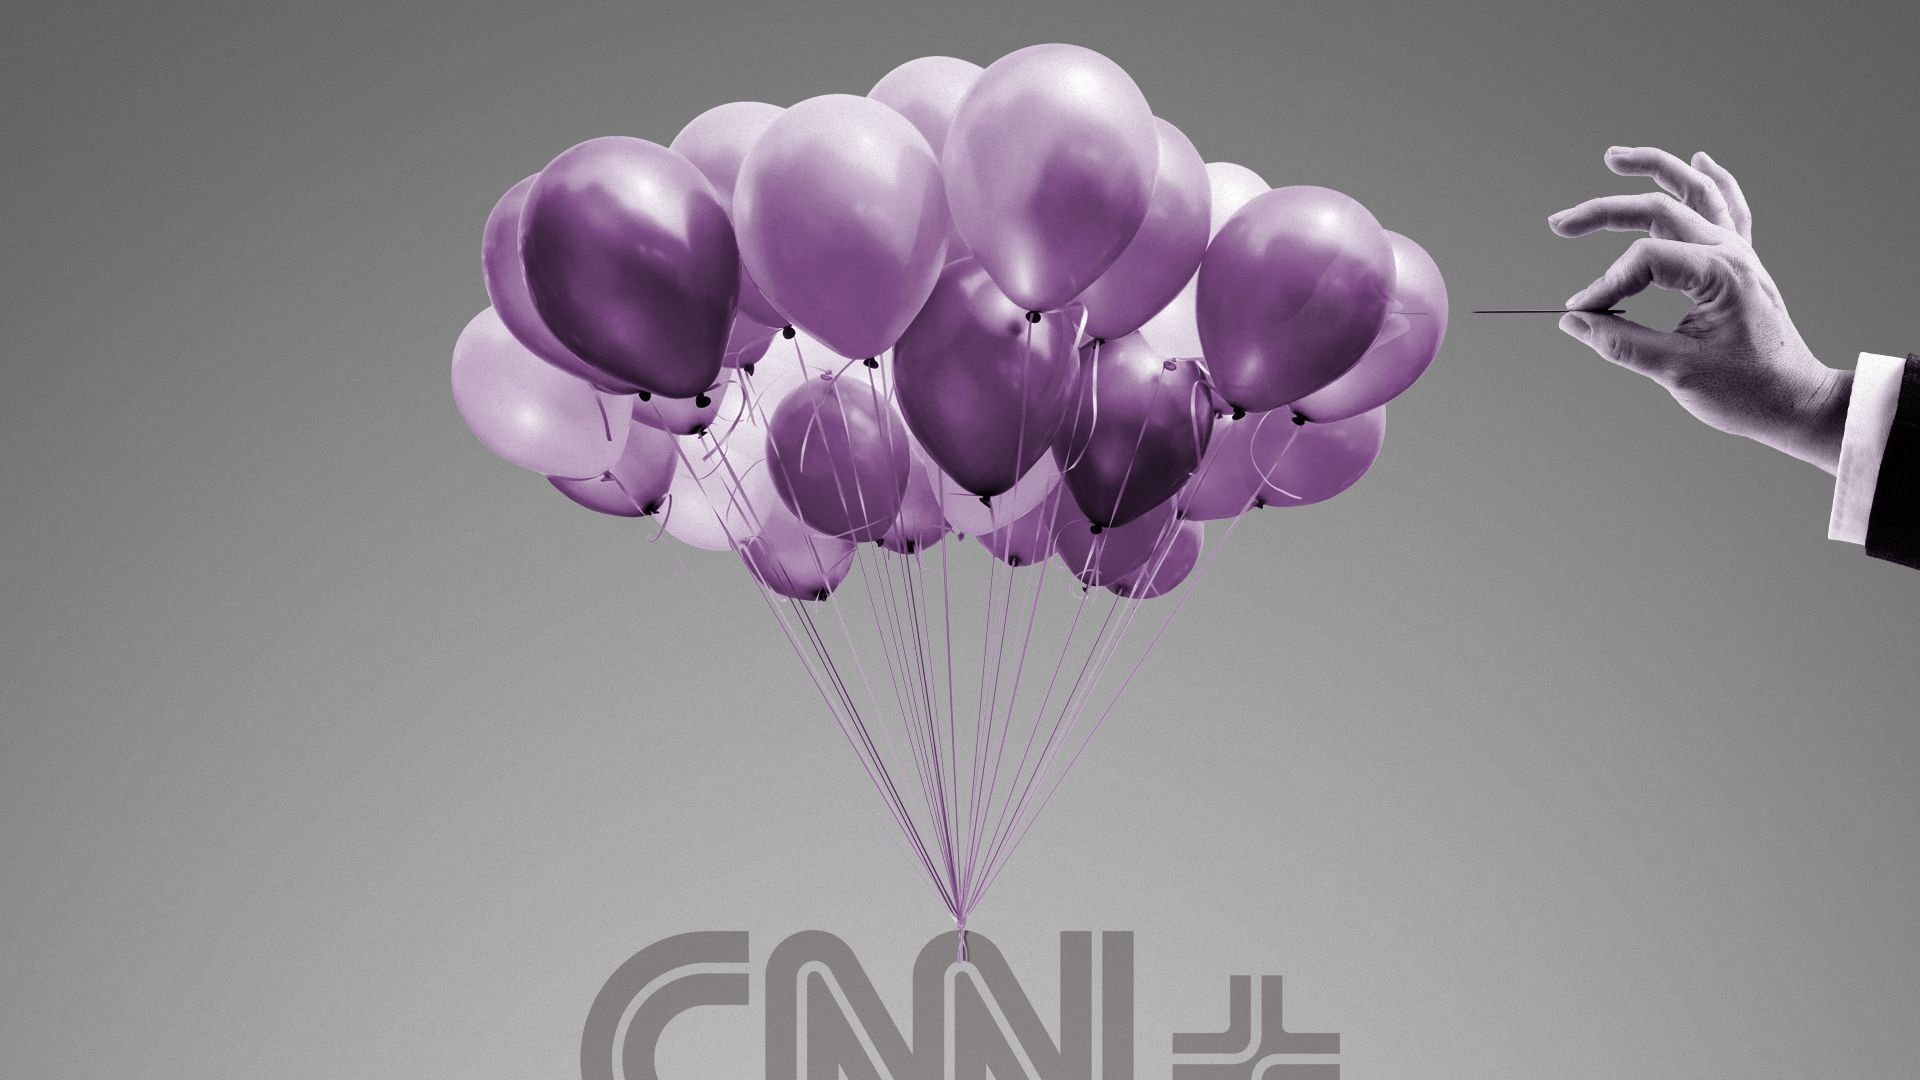 Illustration of a hand holding a needle that is about to pop a bunch of balloons that is holding up the CNN+ logo.